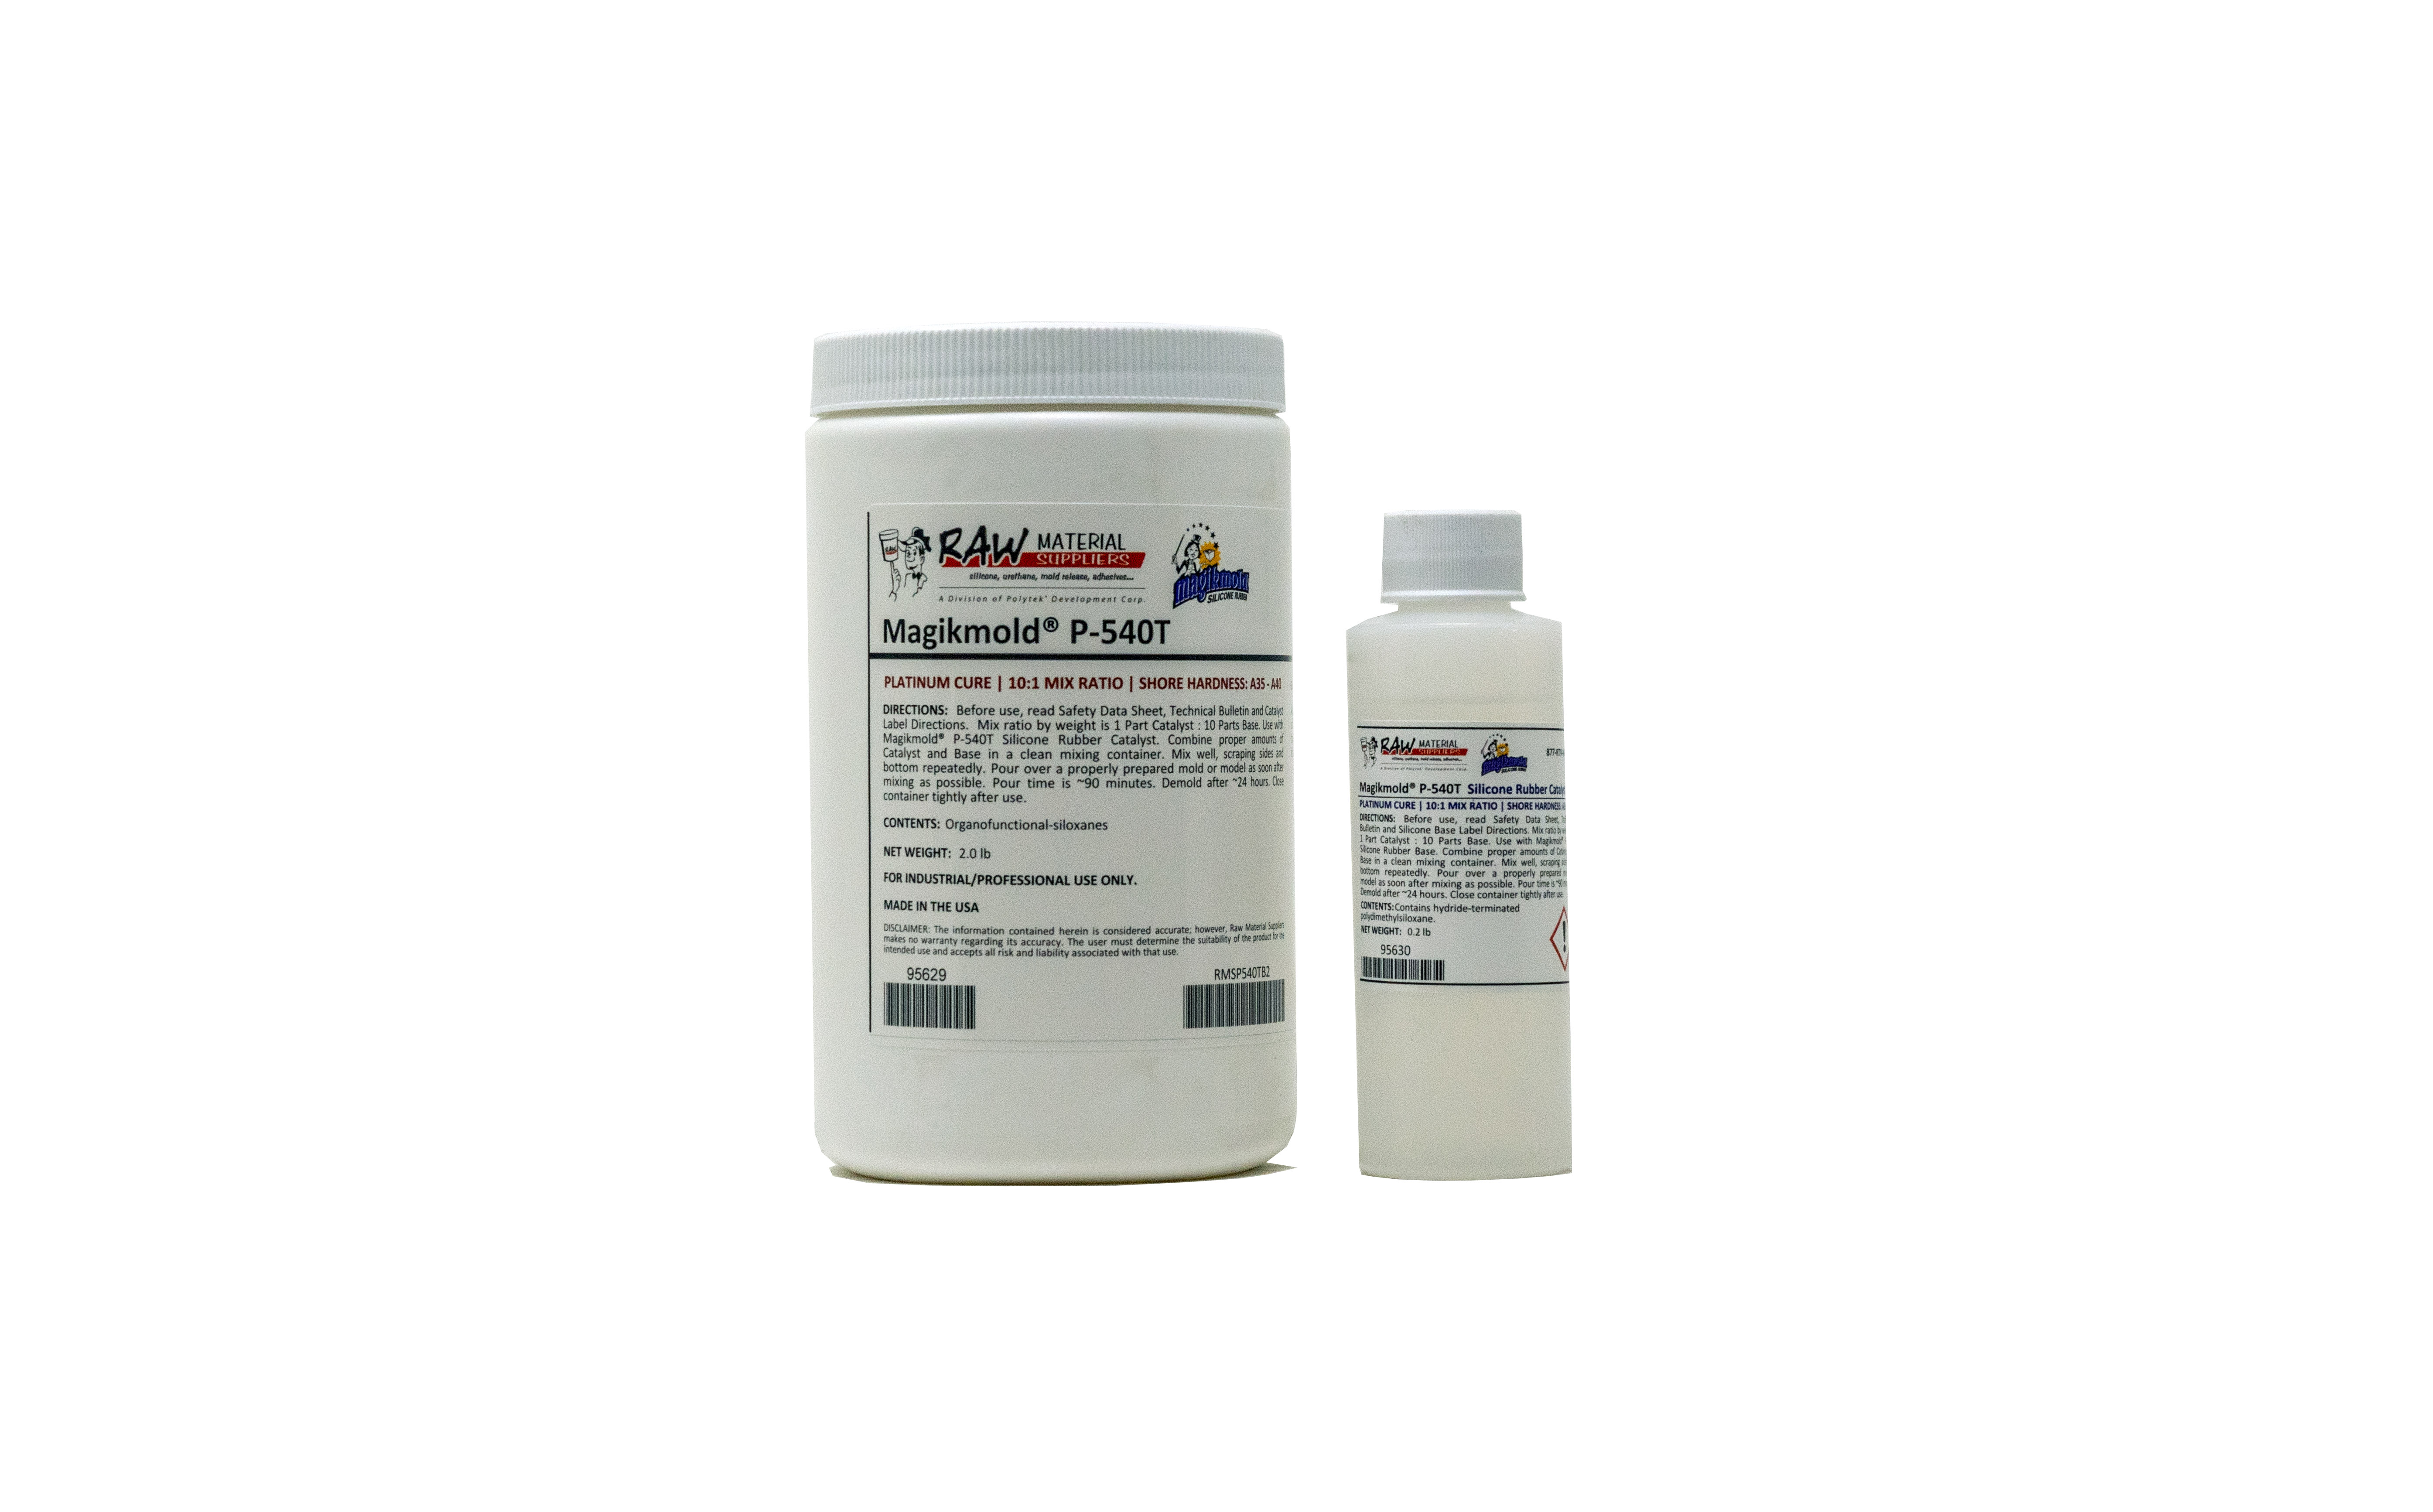 Platinum Cure Silicone Rubber For Flexible Mold